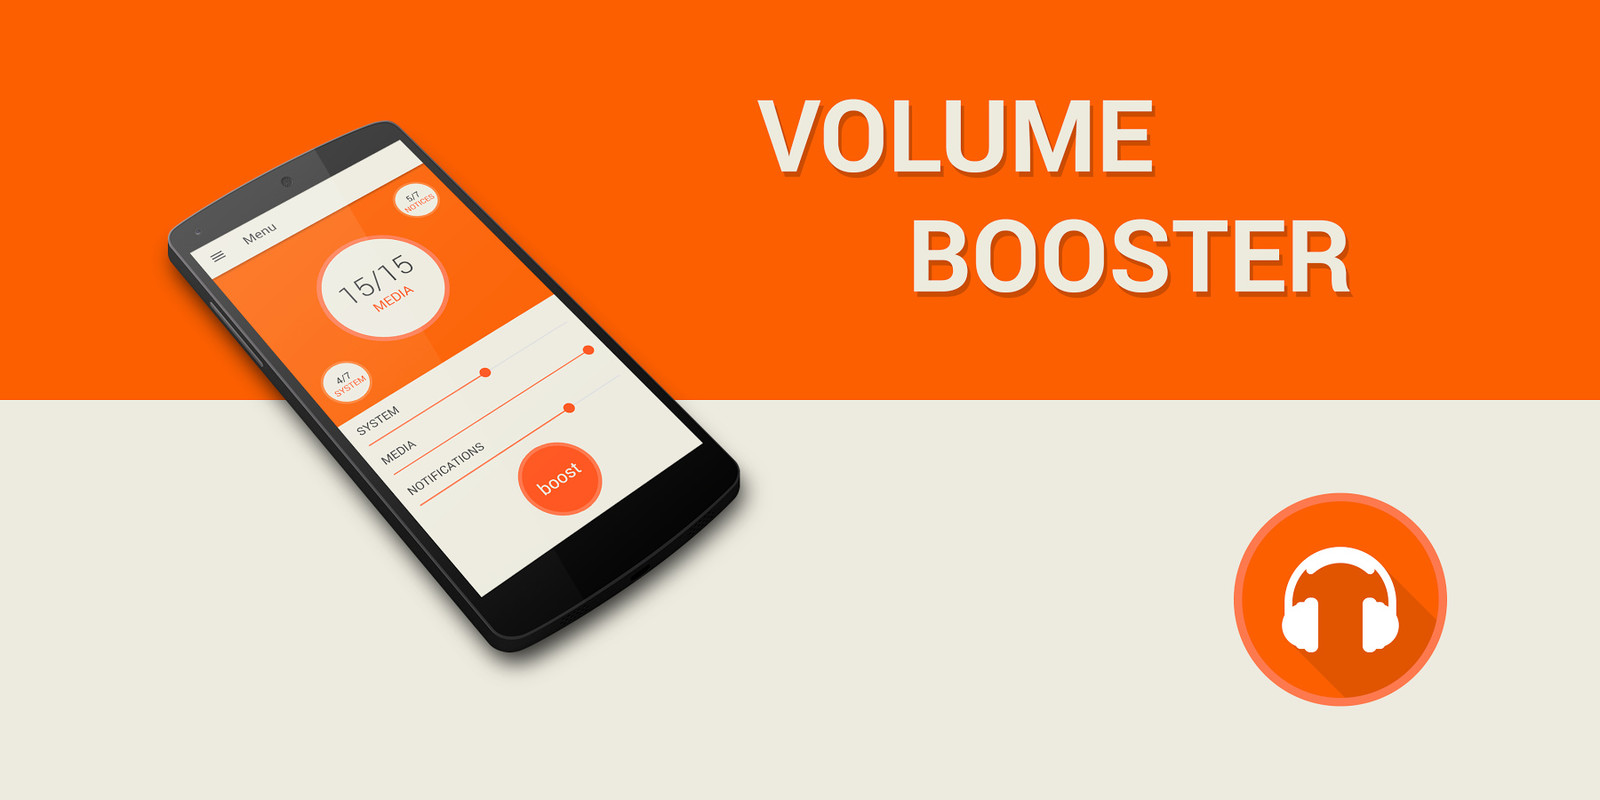 Volume Booster APK Free Android App download - Appraw